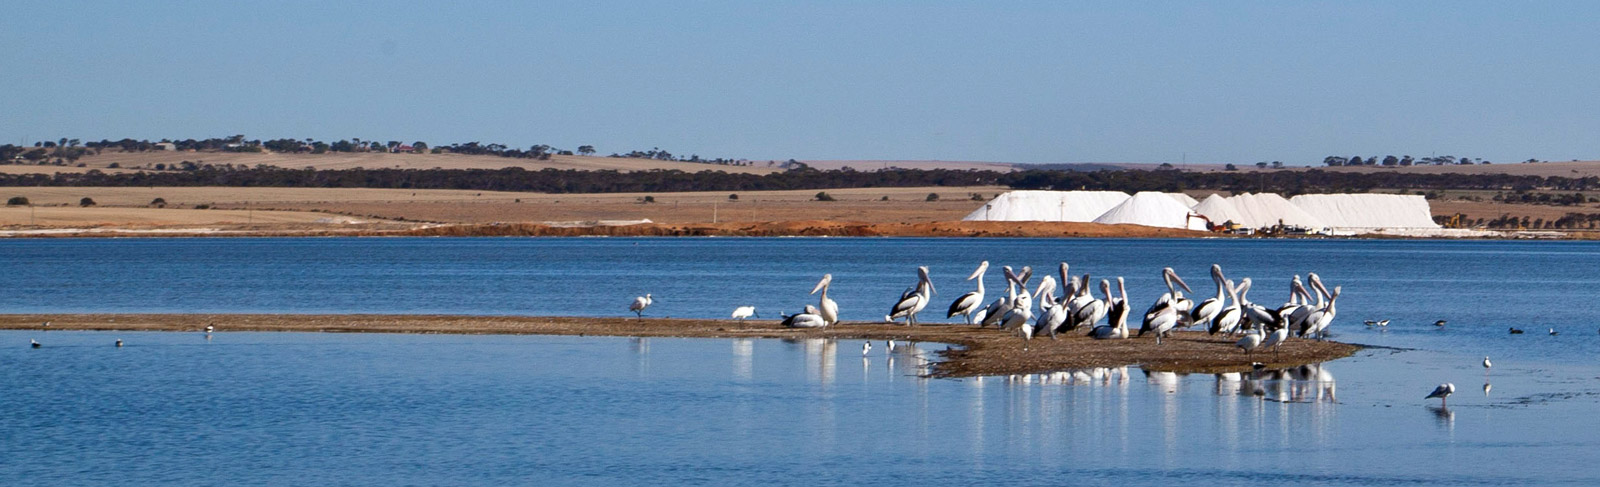 An image of seagulls on a small island of sand in the water. An Australian salt mine can be seen in the background. 